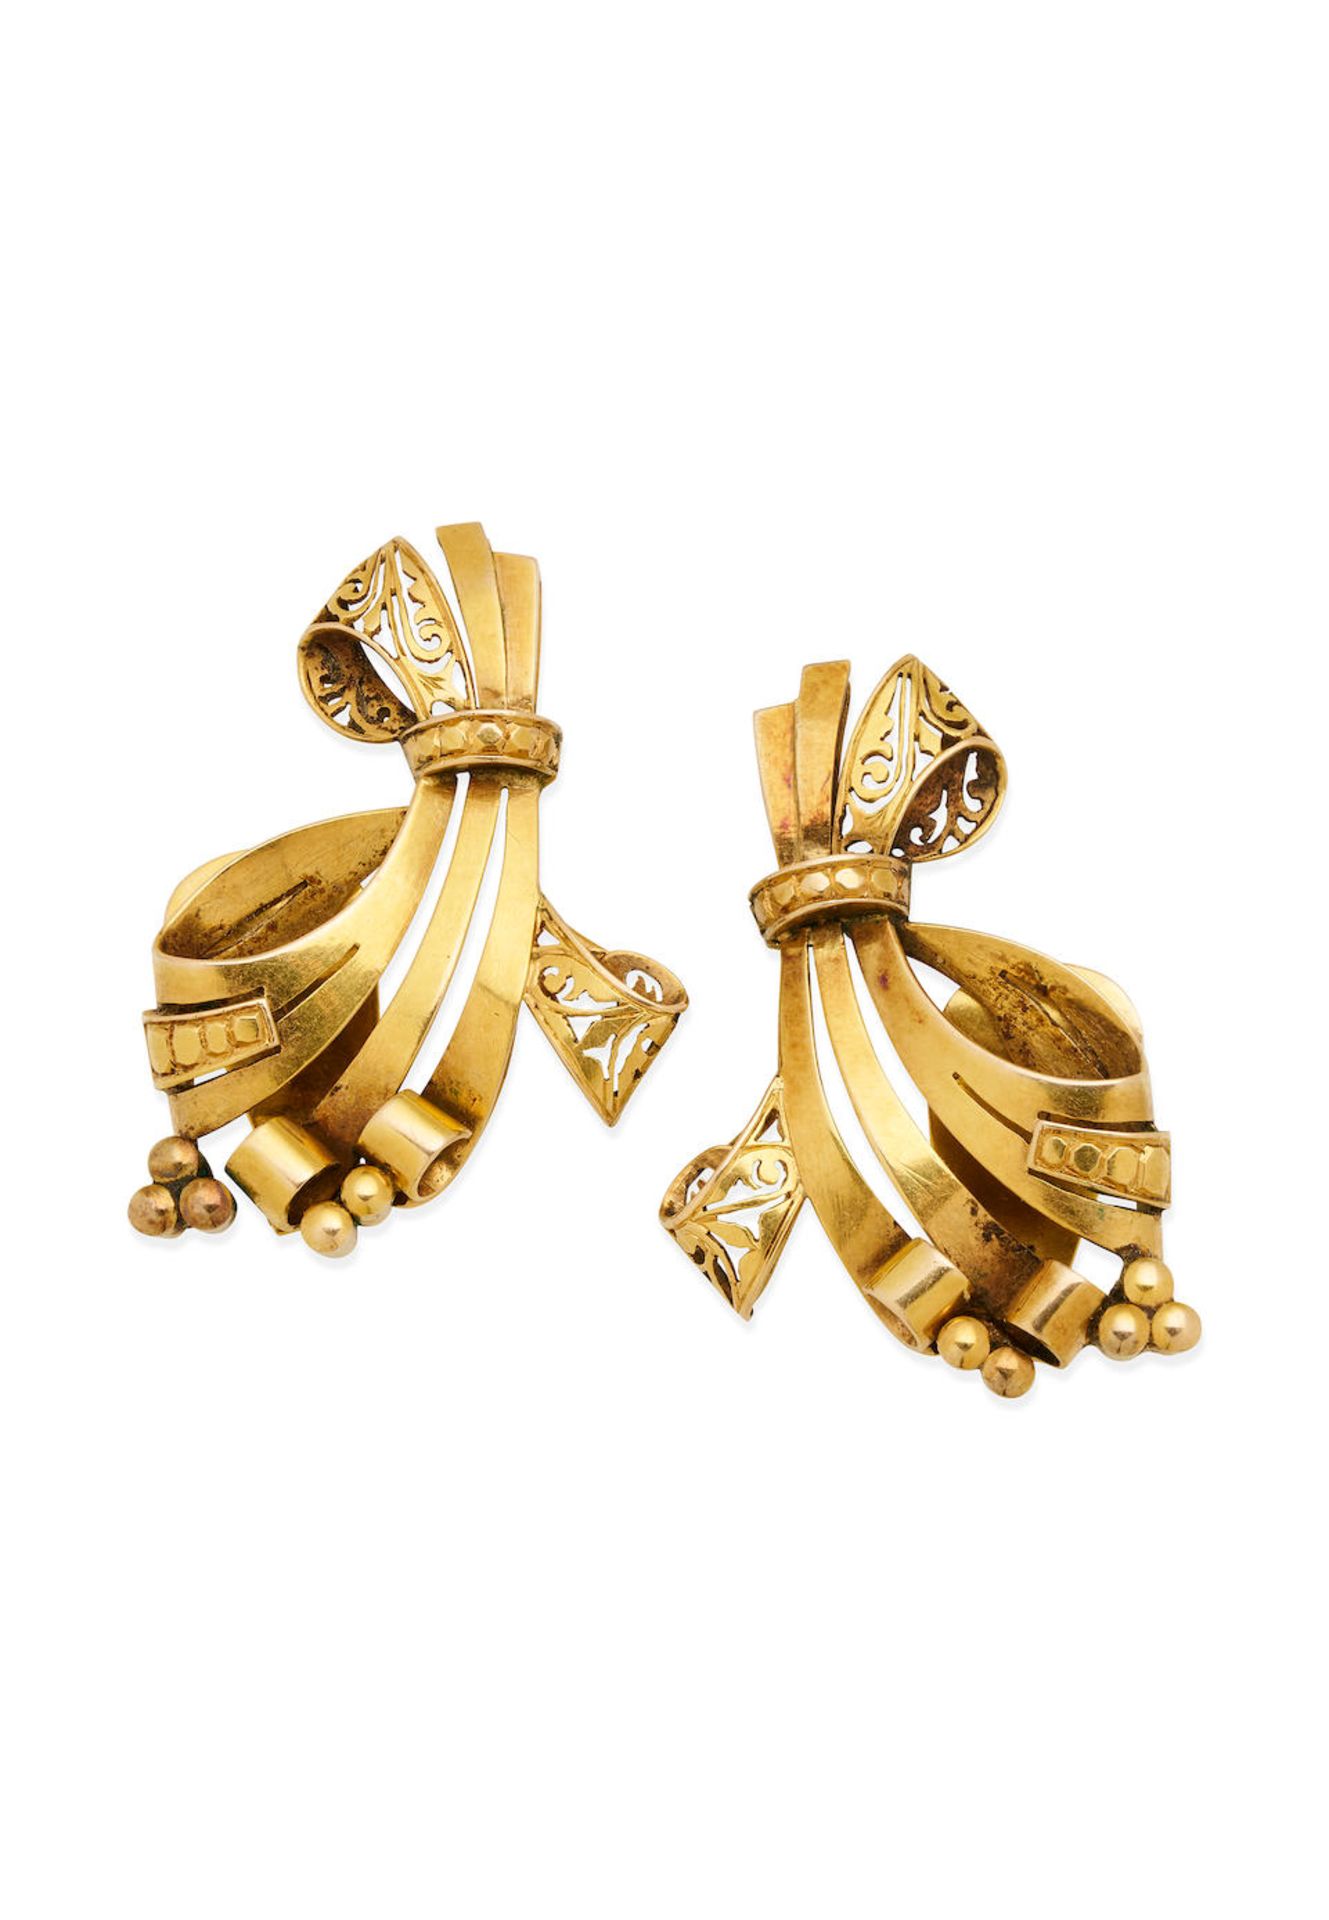 PAIR OF GOLD EARCLIPS